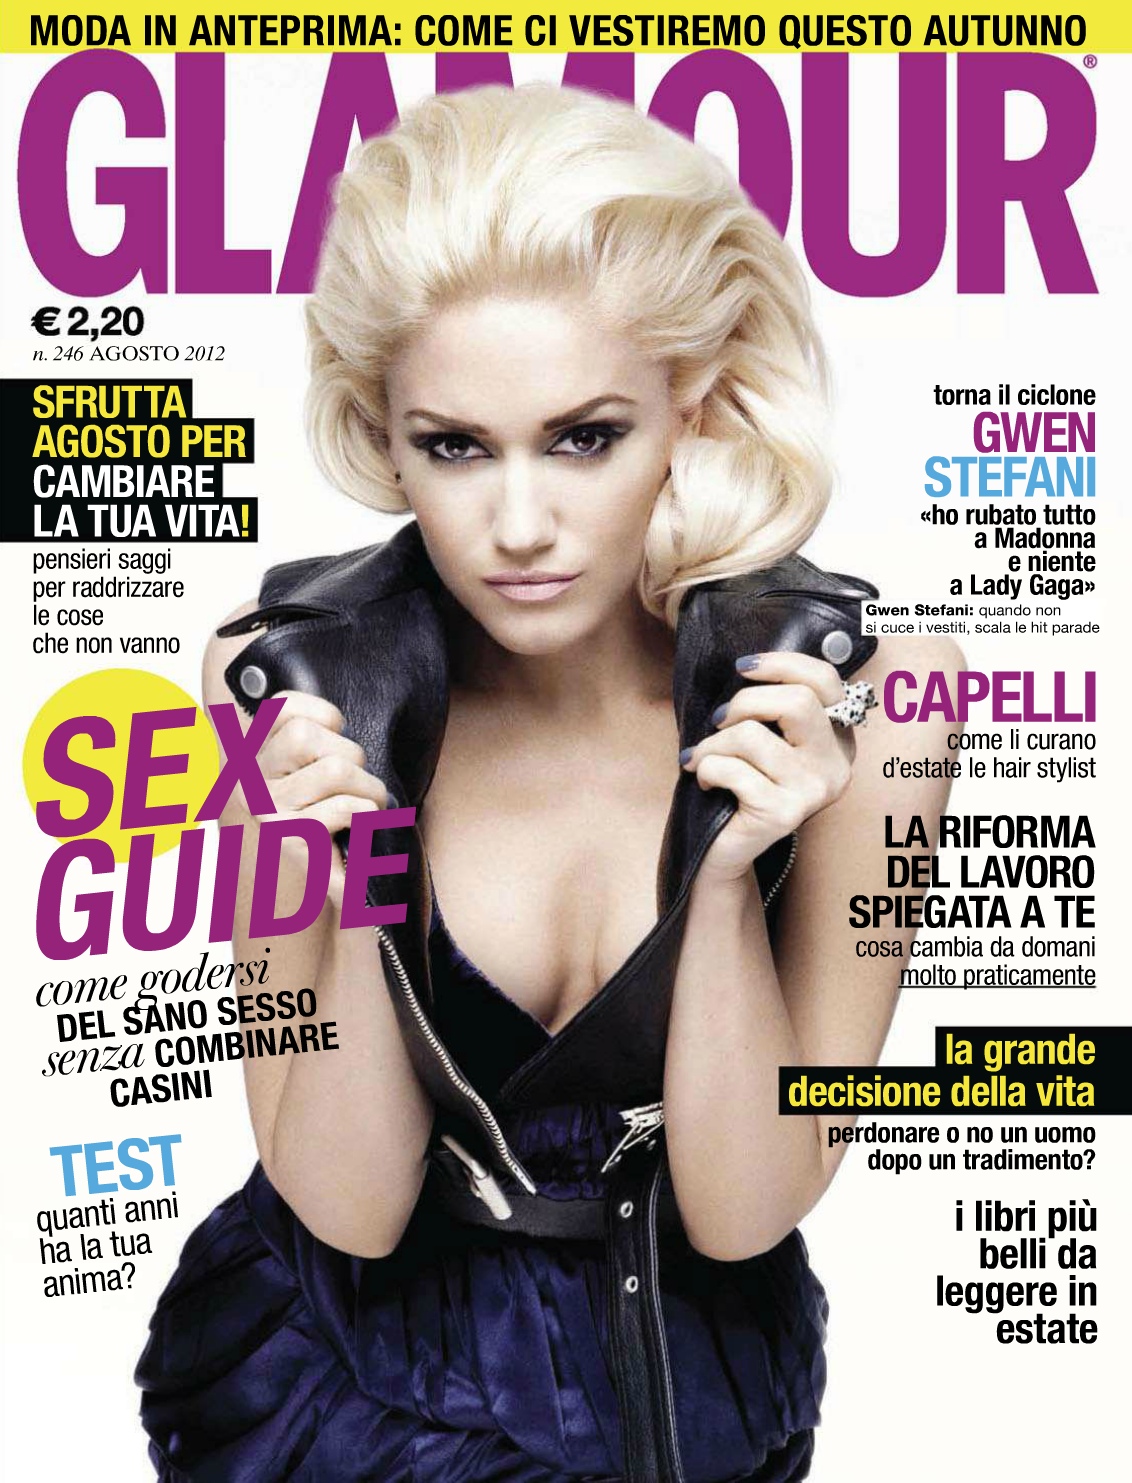 Gwen Stefani shows cleavage for Glamour Magazine Italy August 2012